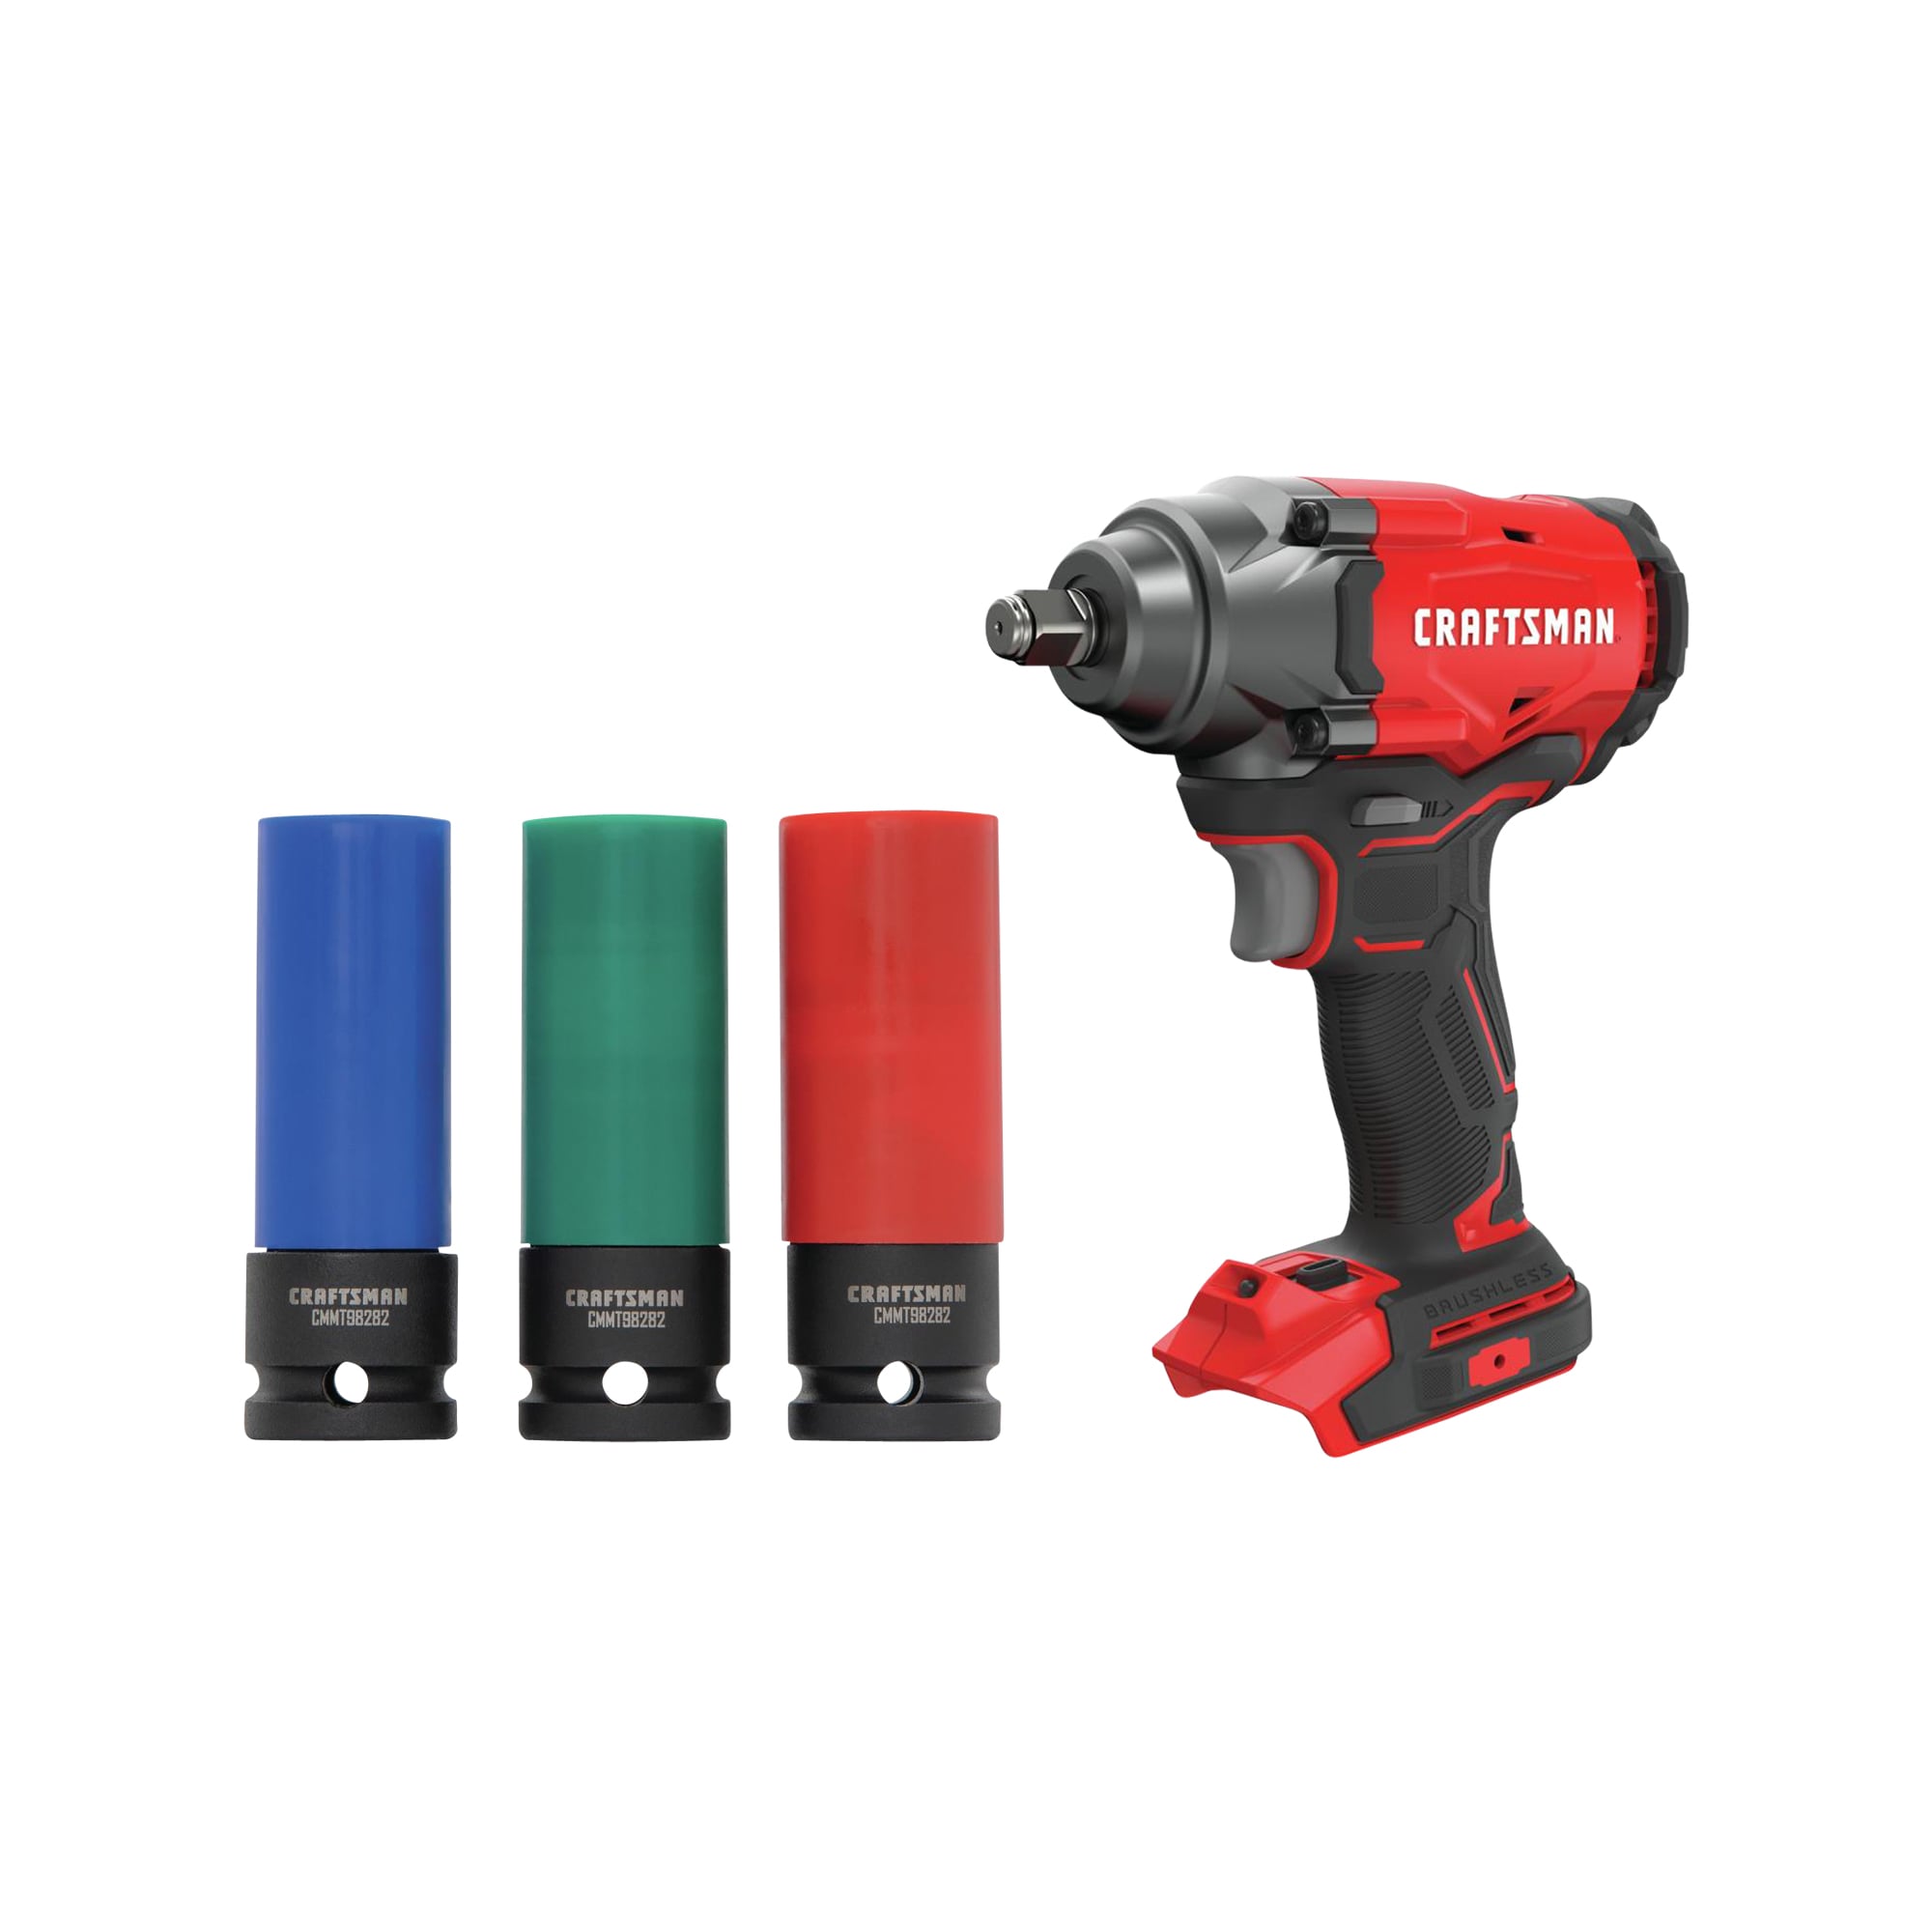 CRAFTSMAN Automotive 3-piece Non-Marring Lug Nut Set & V20-Amp 20-volt Max Variable Speed Brushless 1/2-in Drive Cordless Impact Wrench (Tool Only)